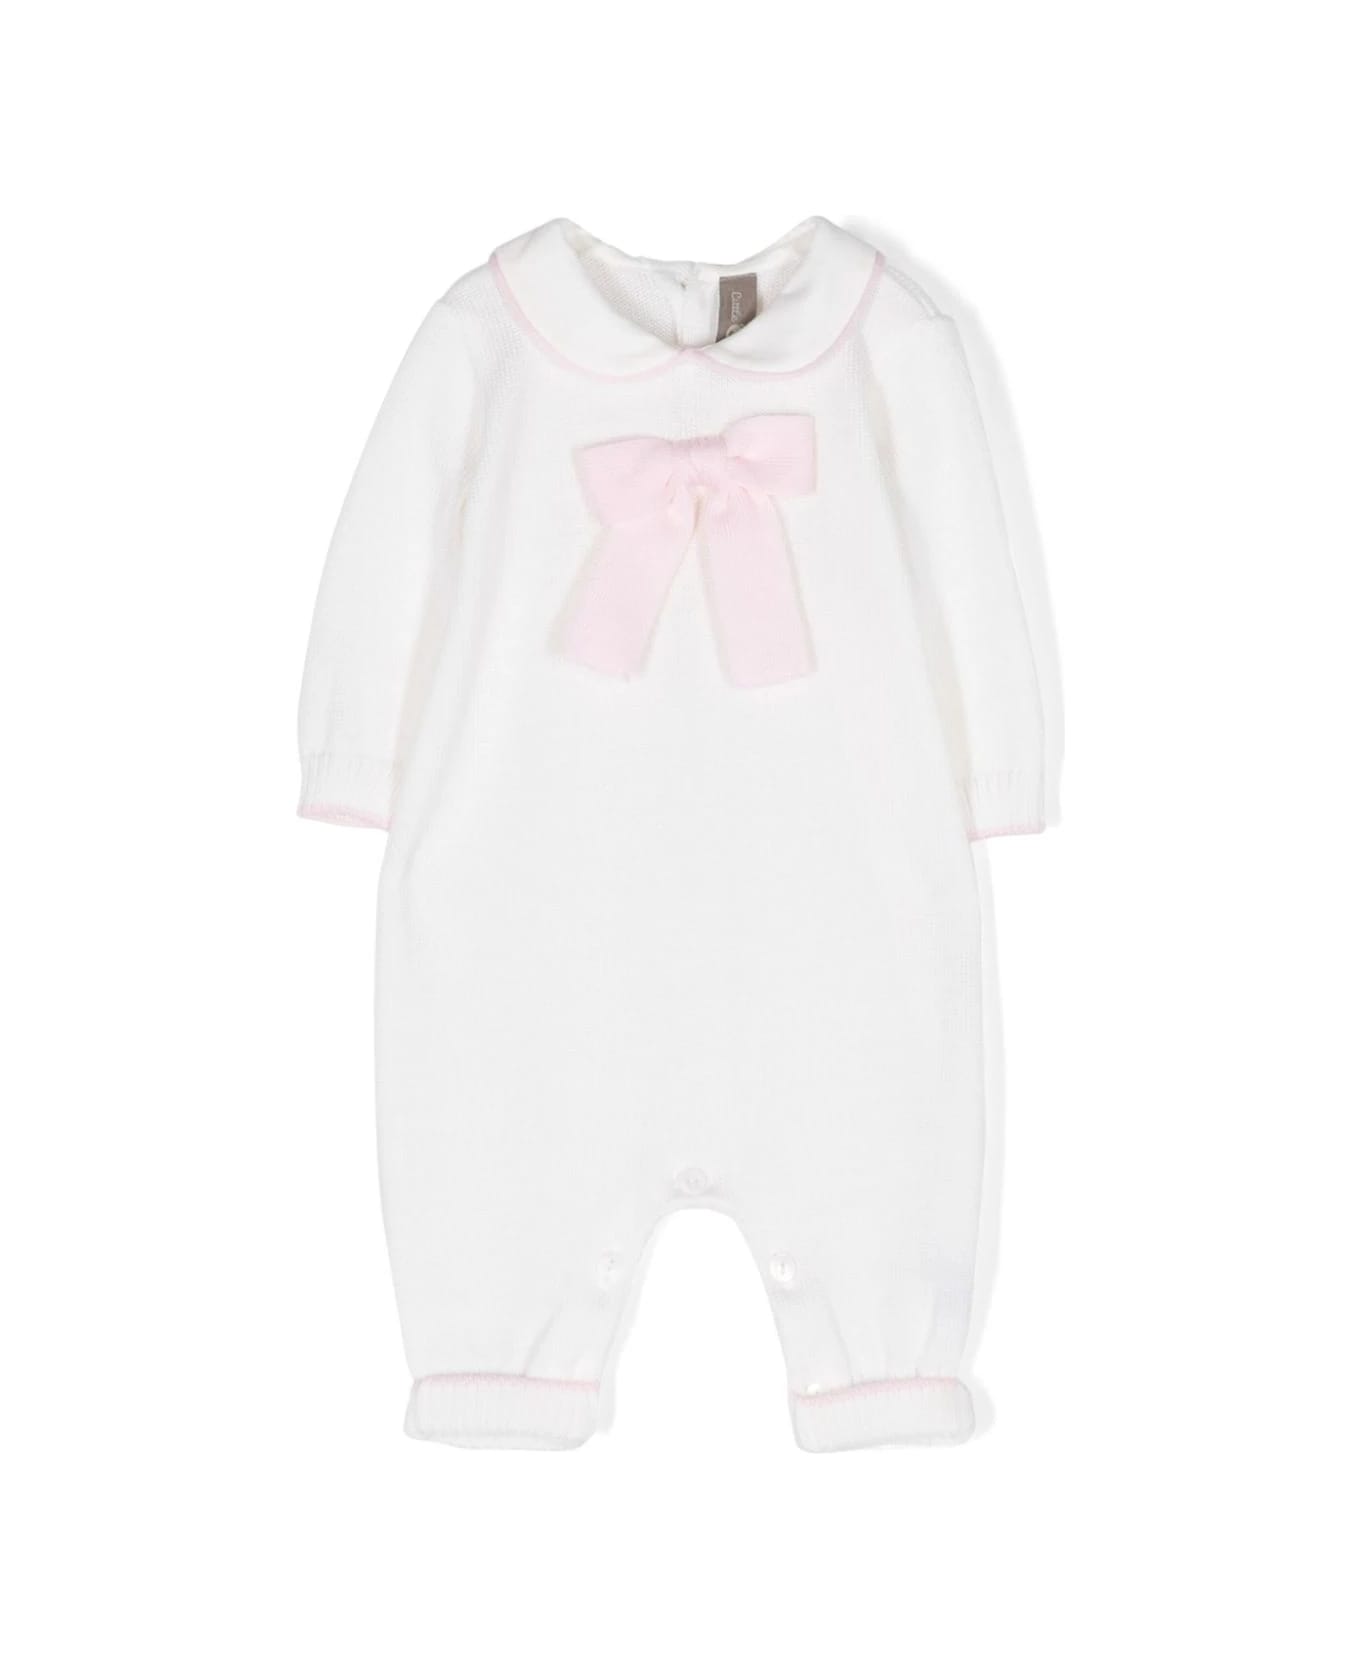 Little Bear Onesie With Bow - White